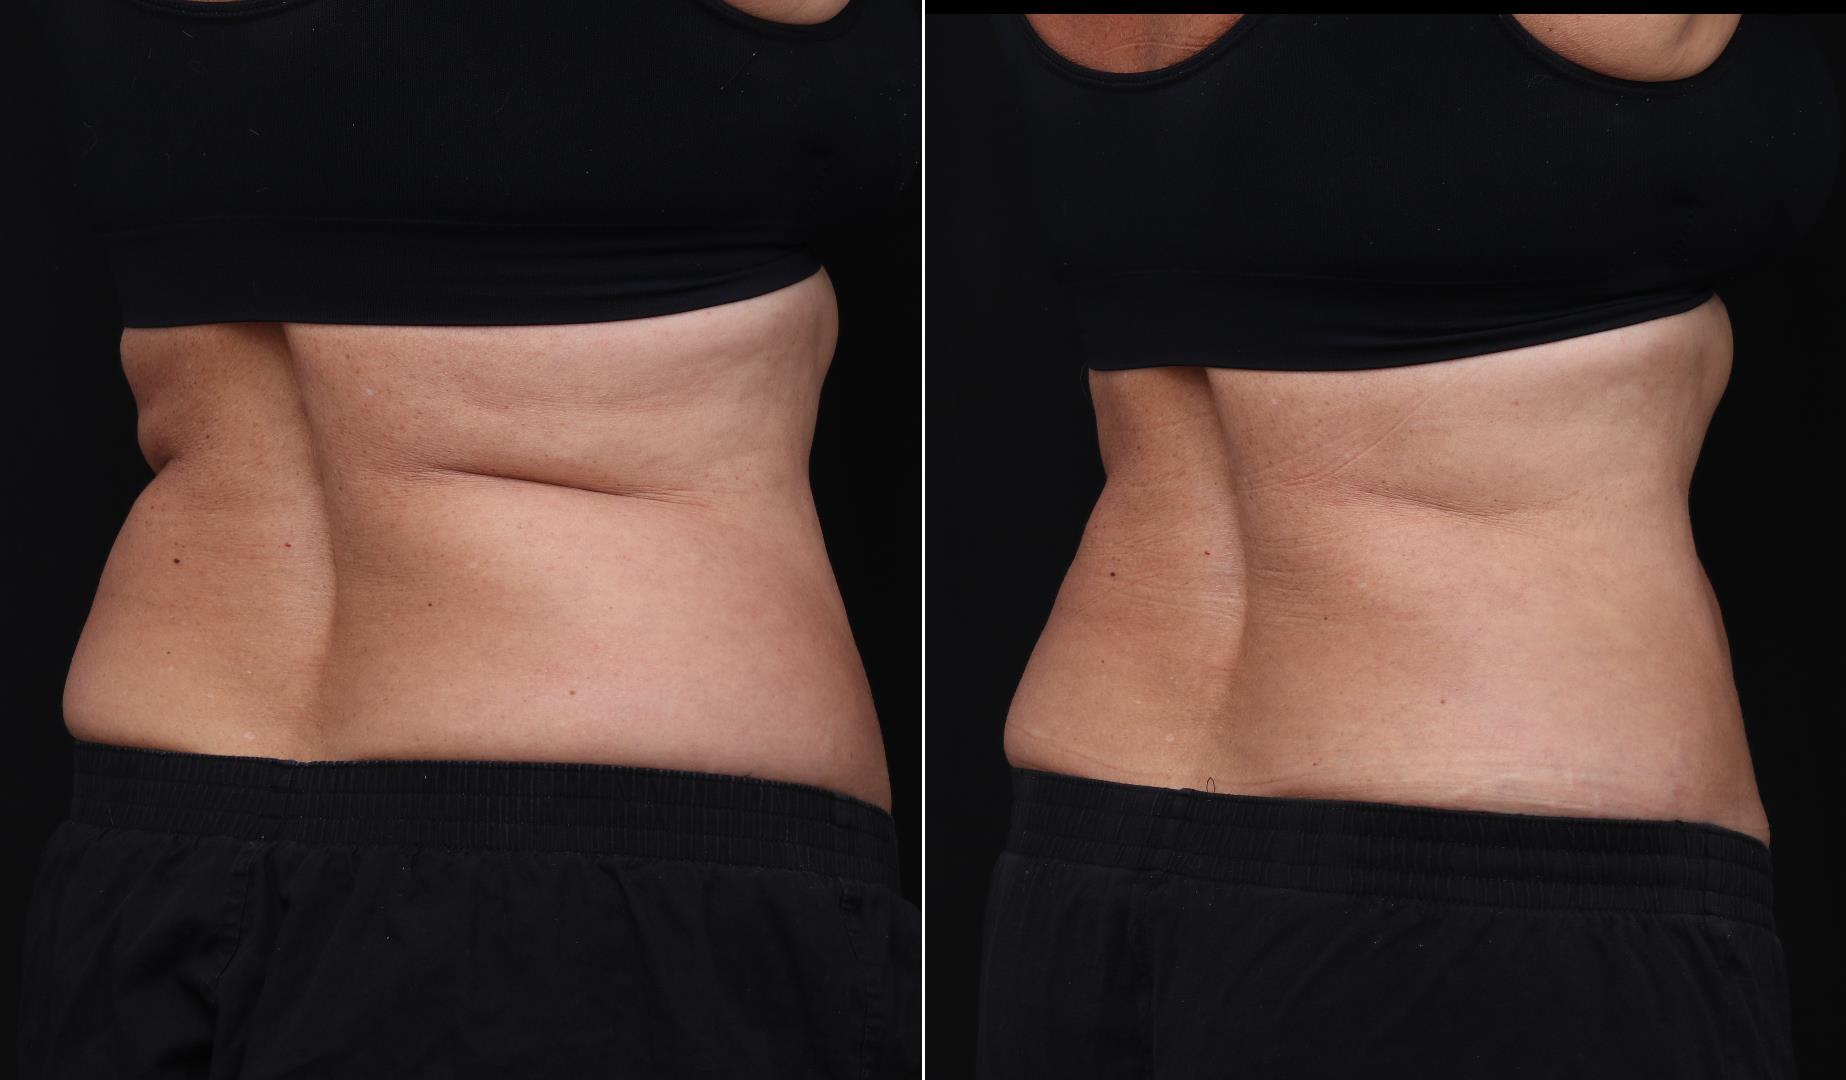 coolsculpting before after abdomen patient 16 - R